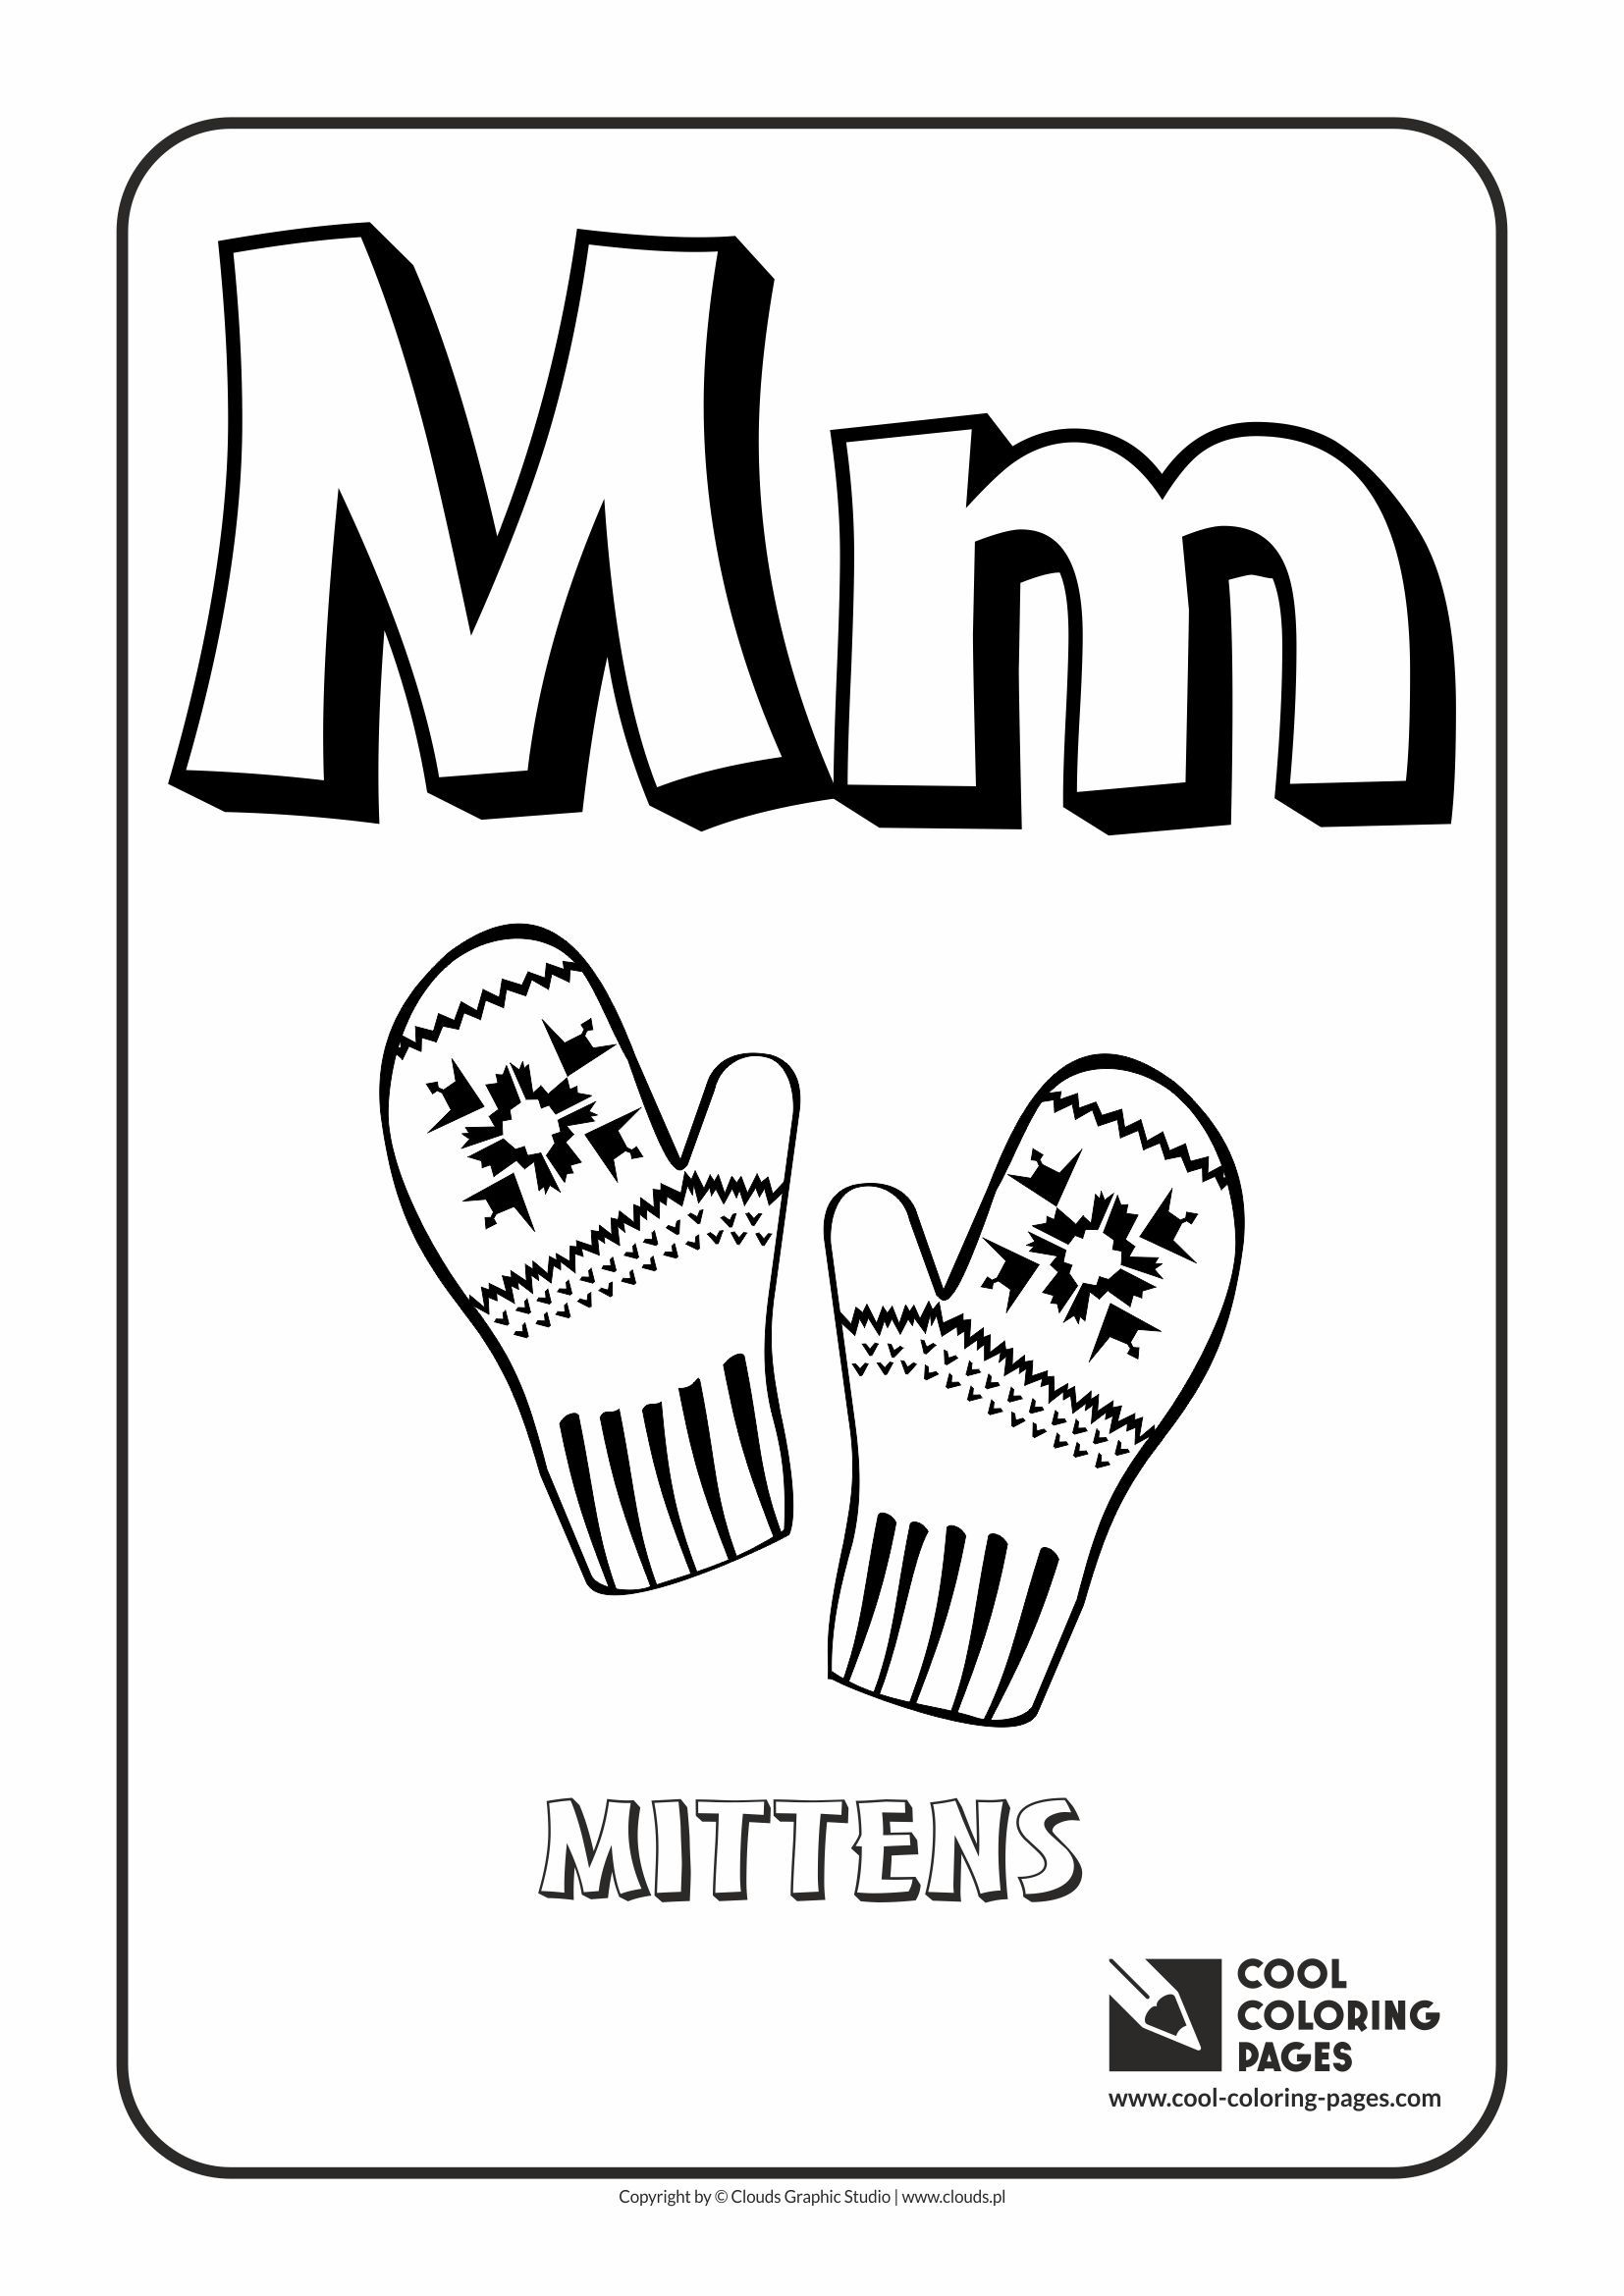 Cool Coloring Pages Letter M - Coloring Alphabet - Cool Coloring Pages |  Free educational coloring pages and activities for kids